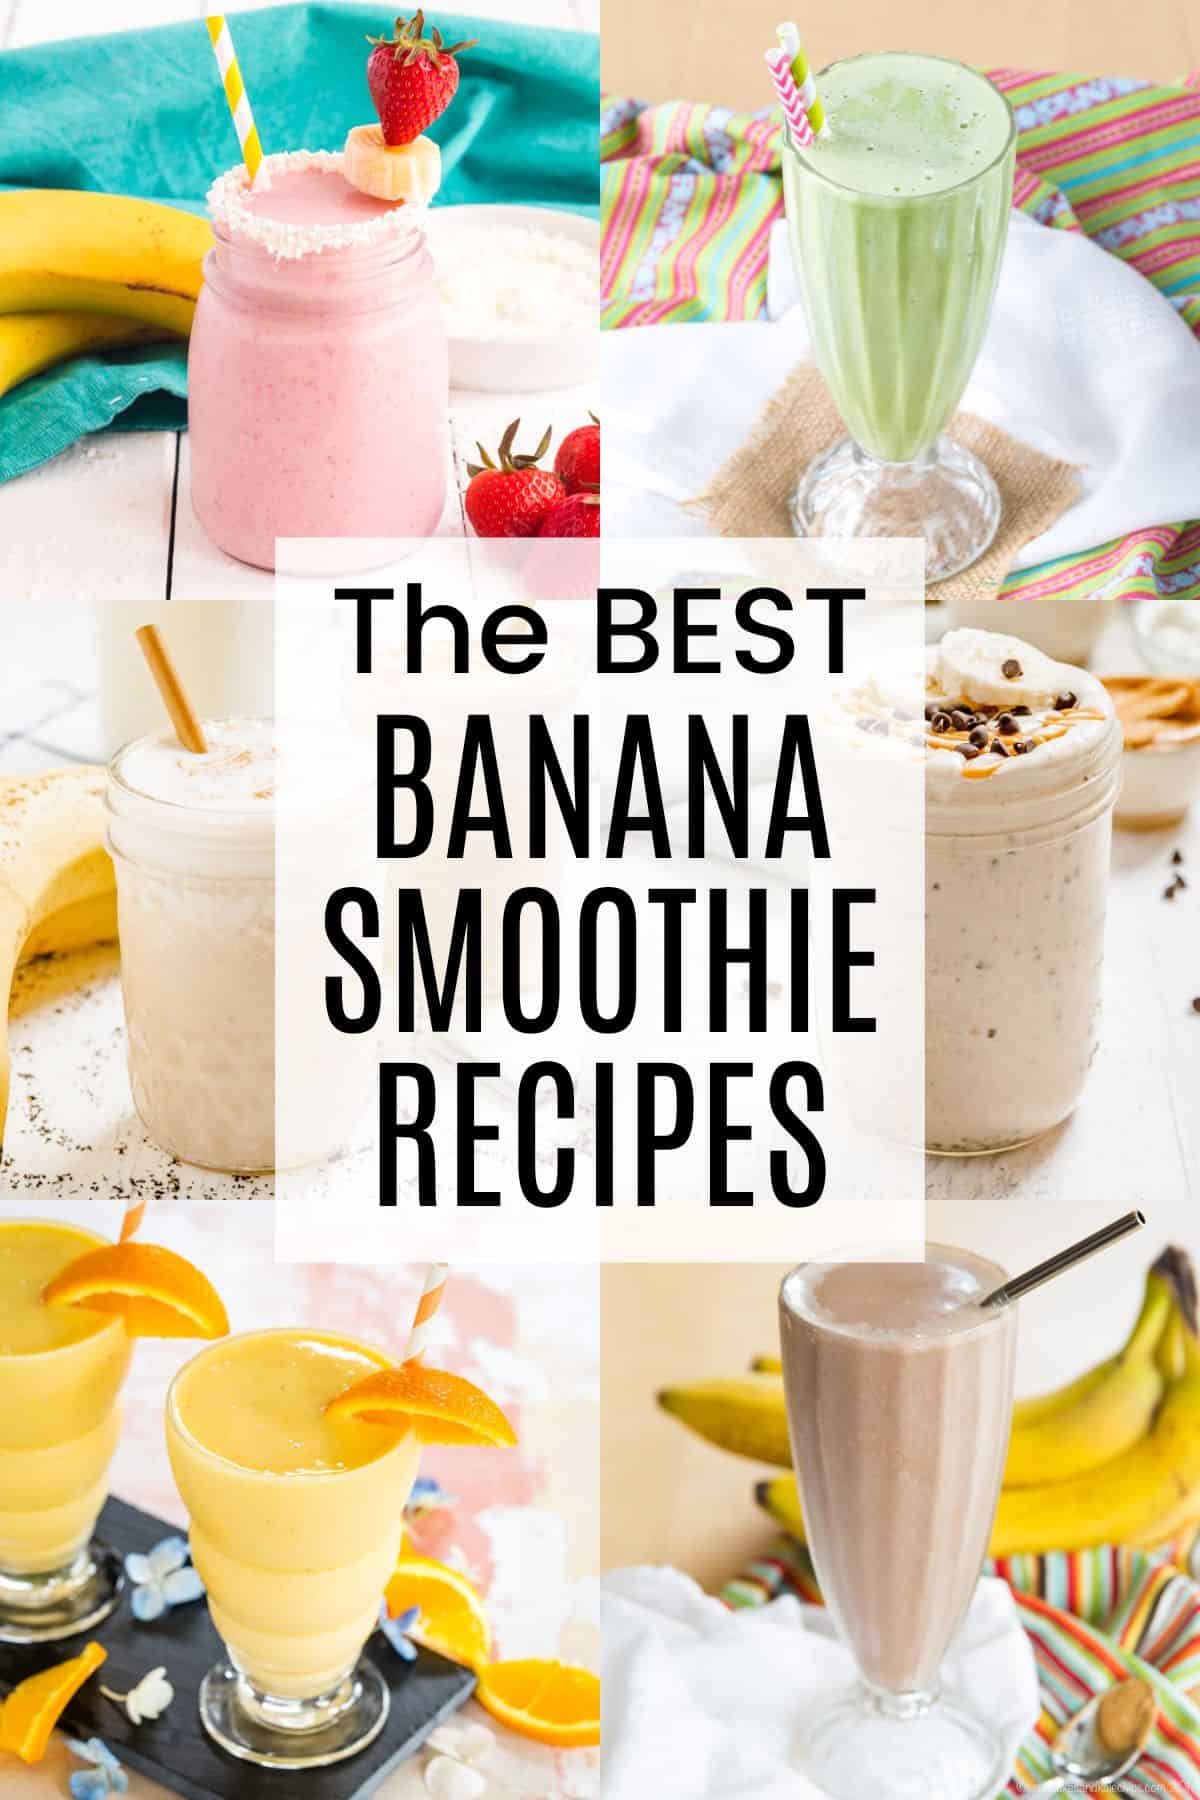 A two-by-three collage of different banana smoothies with a white box in the middle with text overlay that says "The Best Banana Smoothie Recipes".